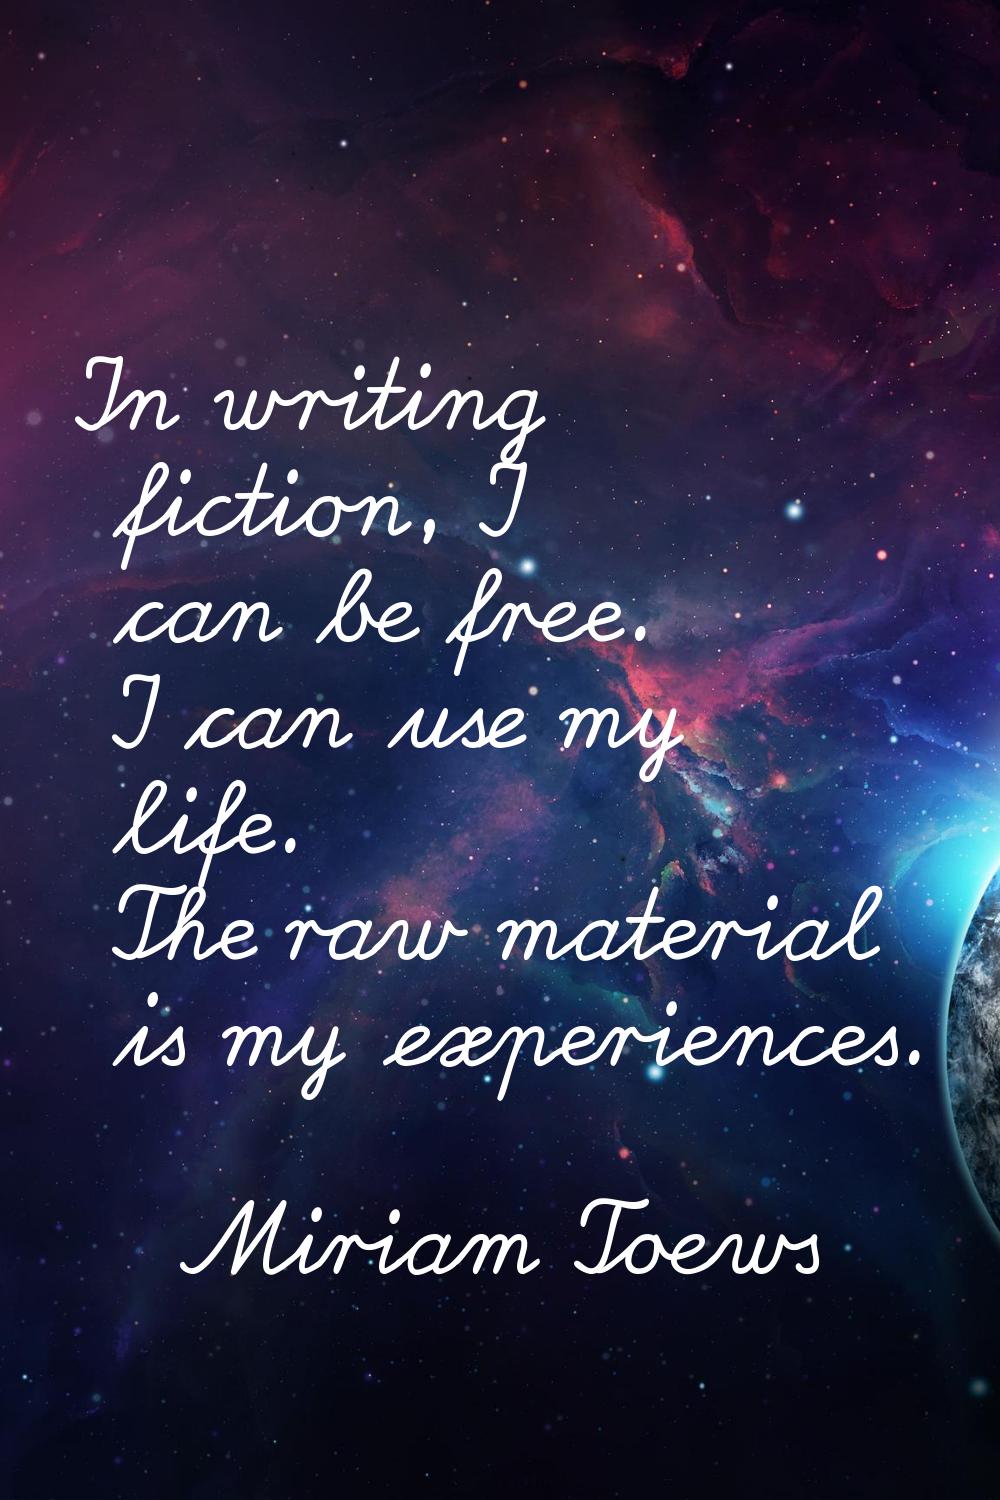 In writing fiction, I can be free. I can use my life. The raw material is my experiences.